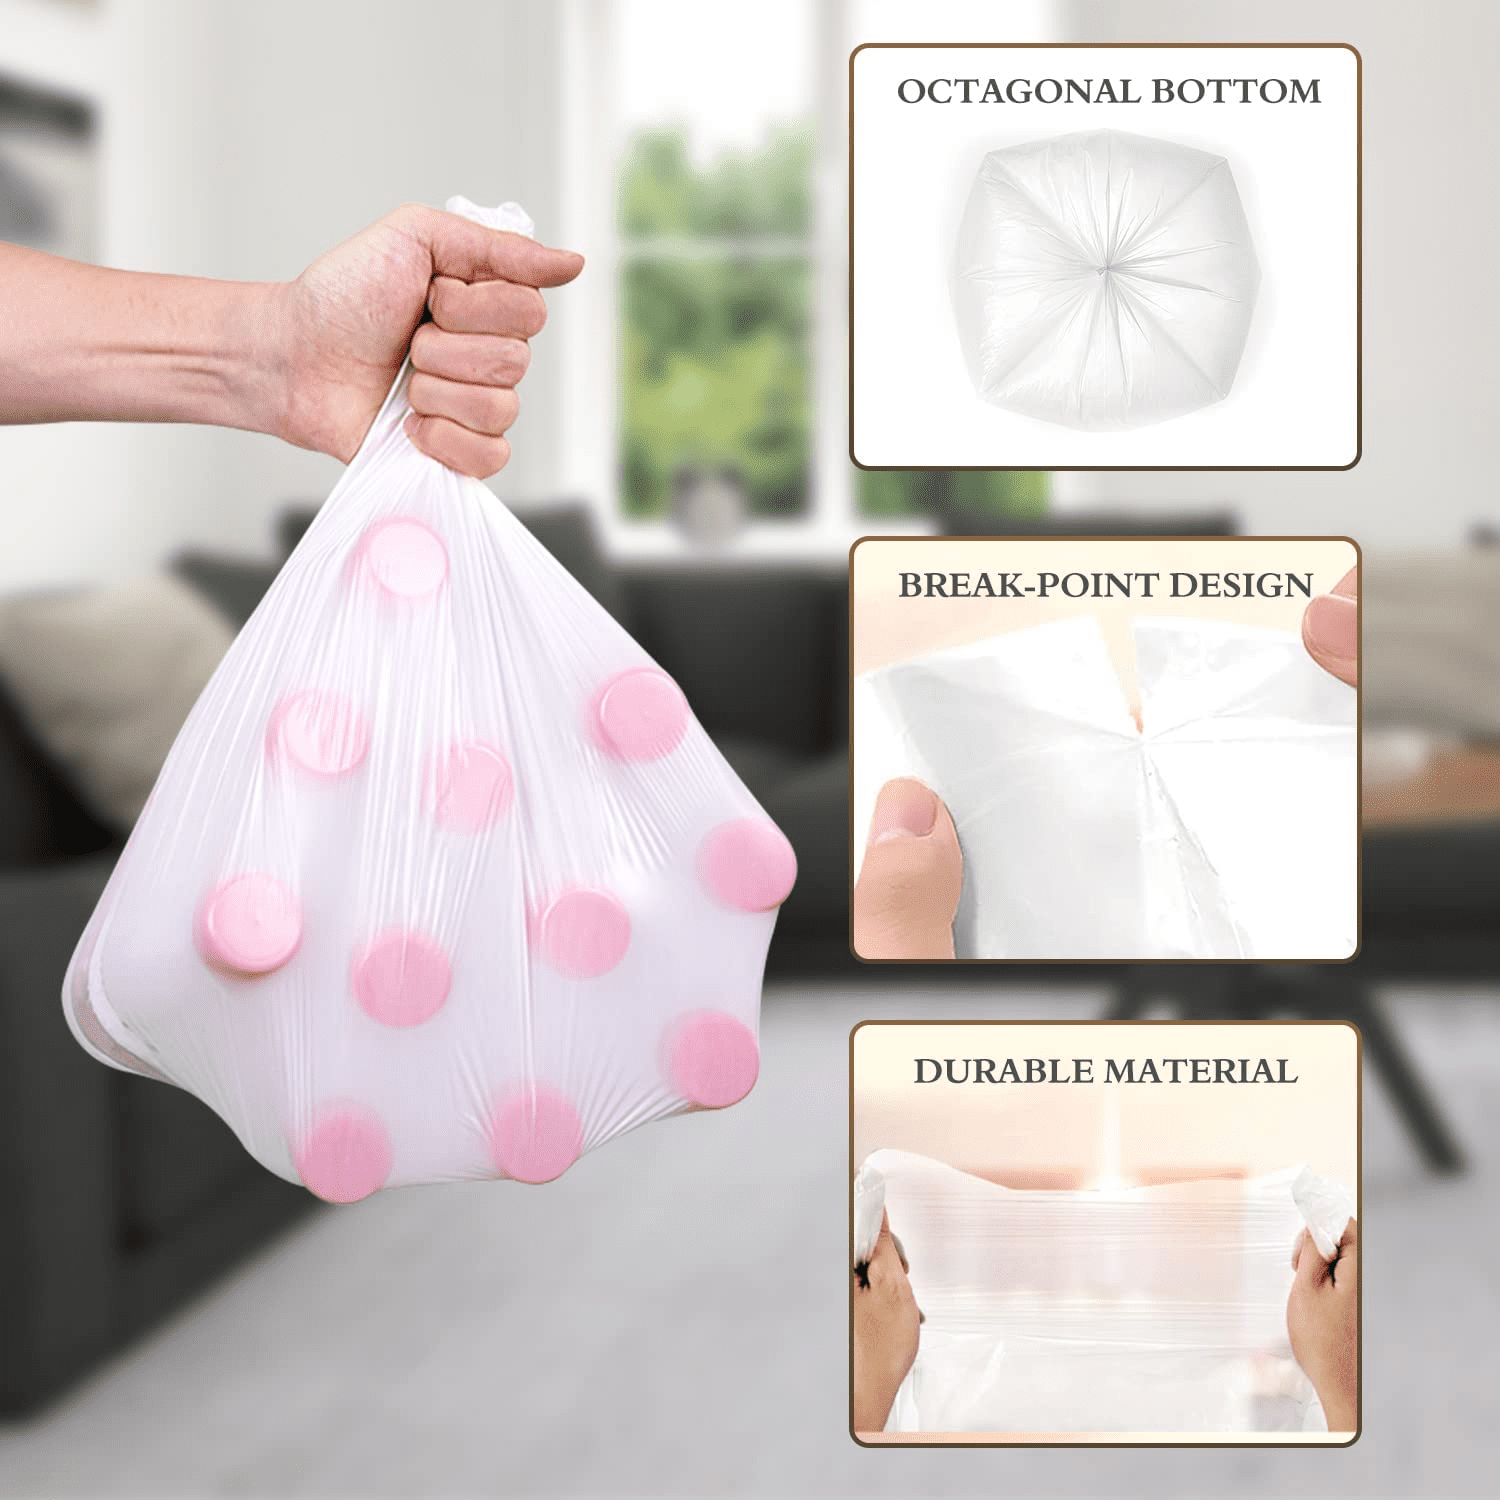 Charmount Small Trash Bags 1.2 Gallon, 102 Count Garbage Bags Bathroom  Trash Can Liners,fit 4.5-5 Liter Clear